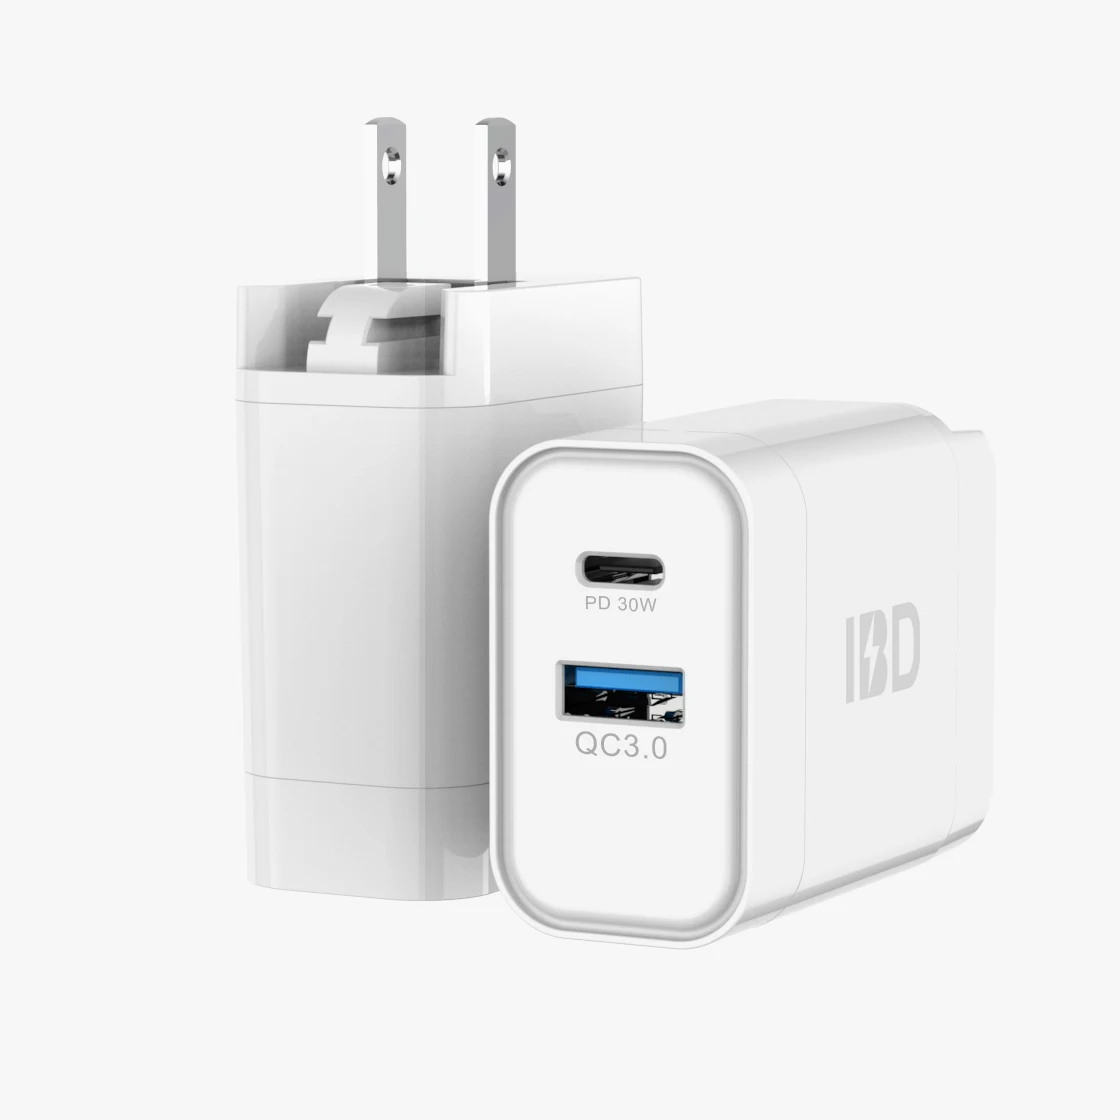 

IBD 2021 Fast Charging New Arrival Phone Charger 30W Type C PD+QC 3.0 And Quick Charging Wall Charger PPS-30W PD, Black+white/grey+white/full white/full black/oem